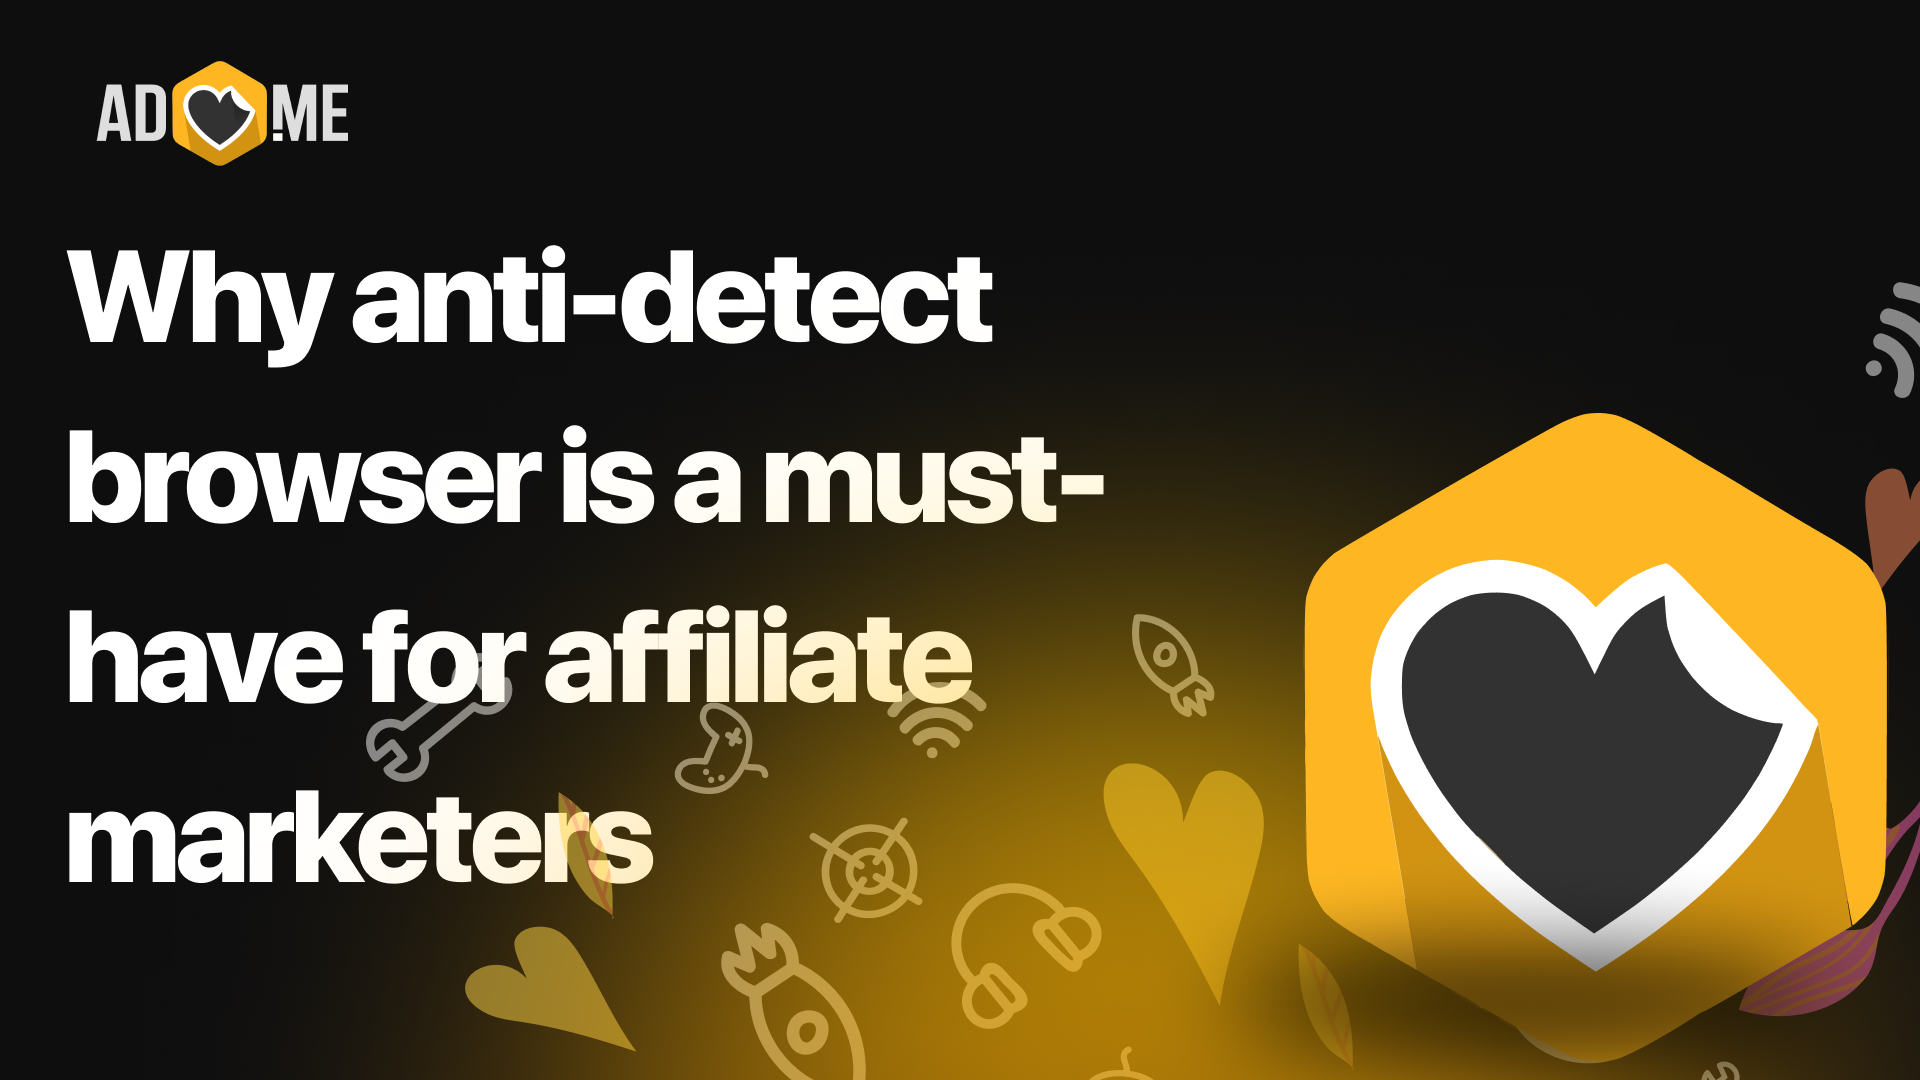 Why anti-detect browser is a must-have for affiliate marketers